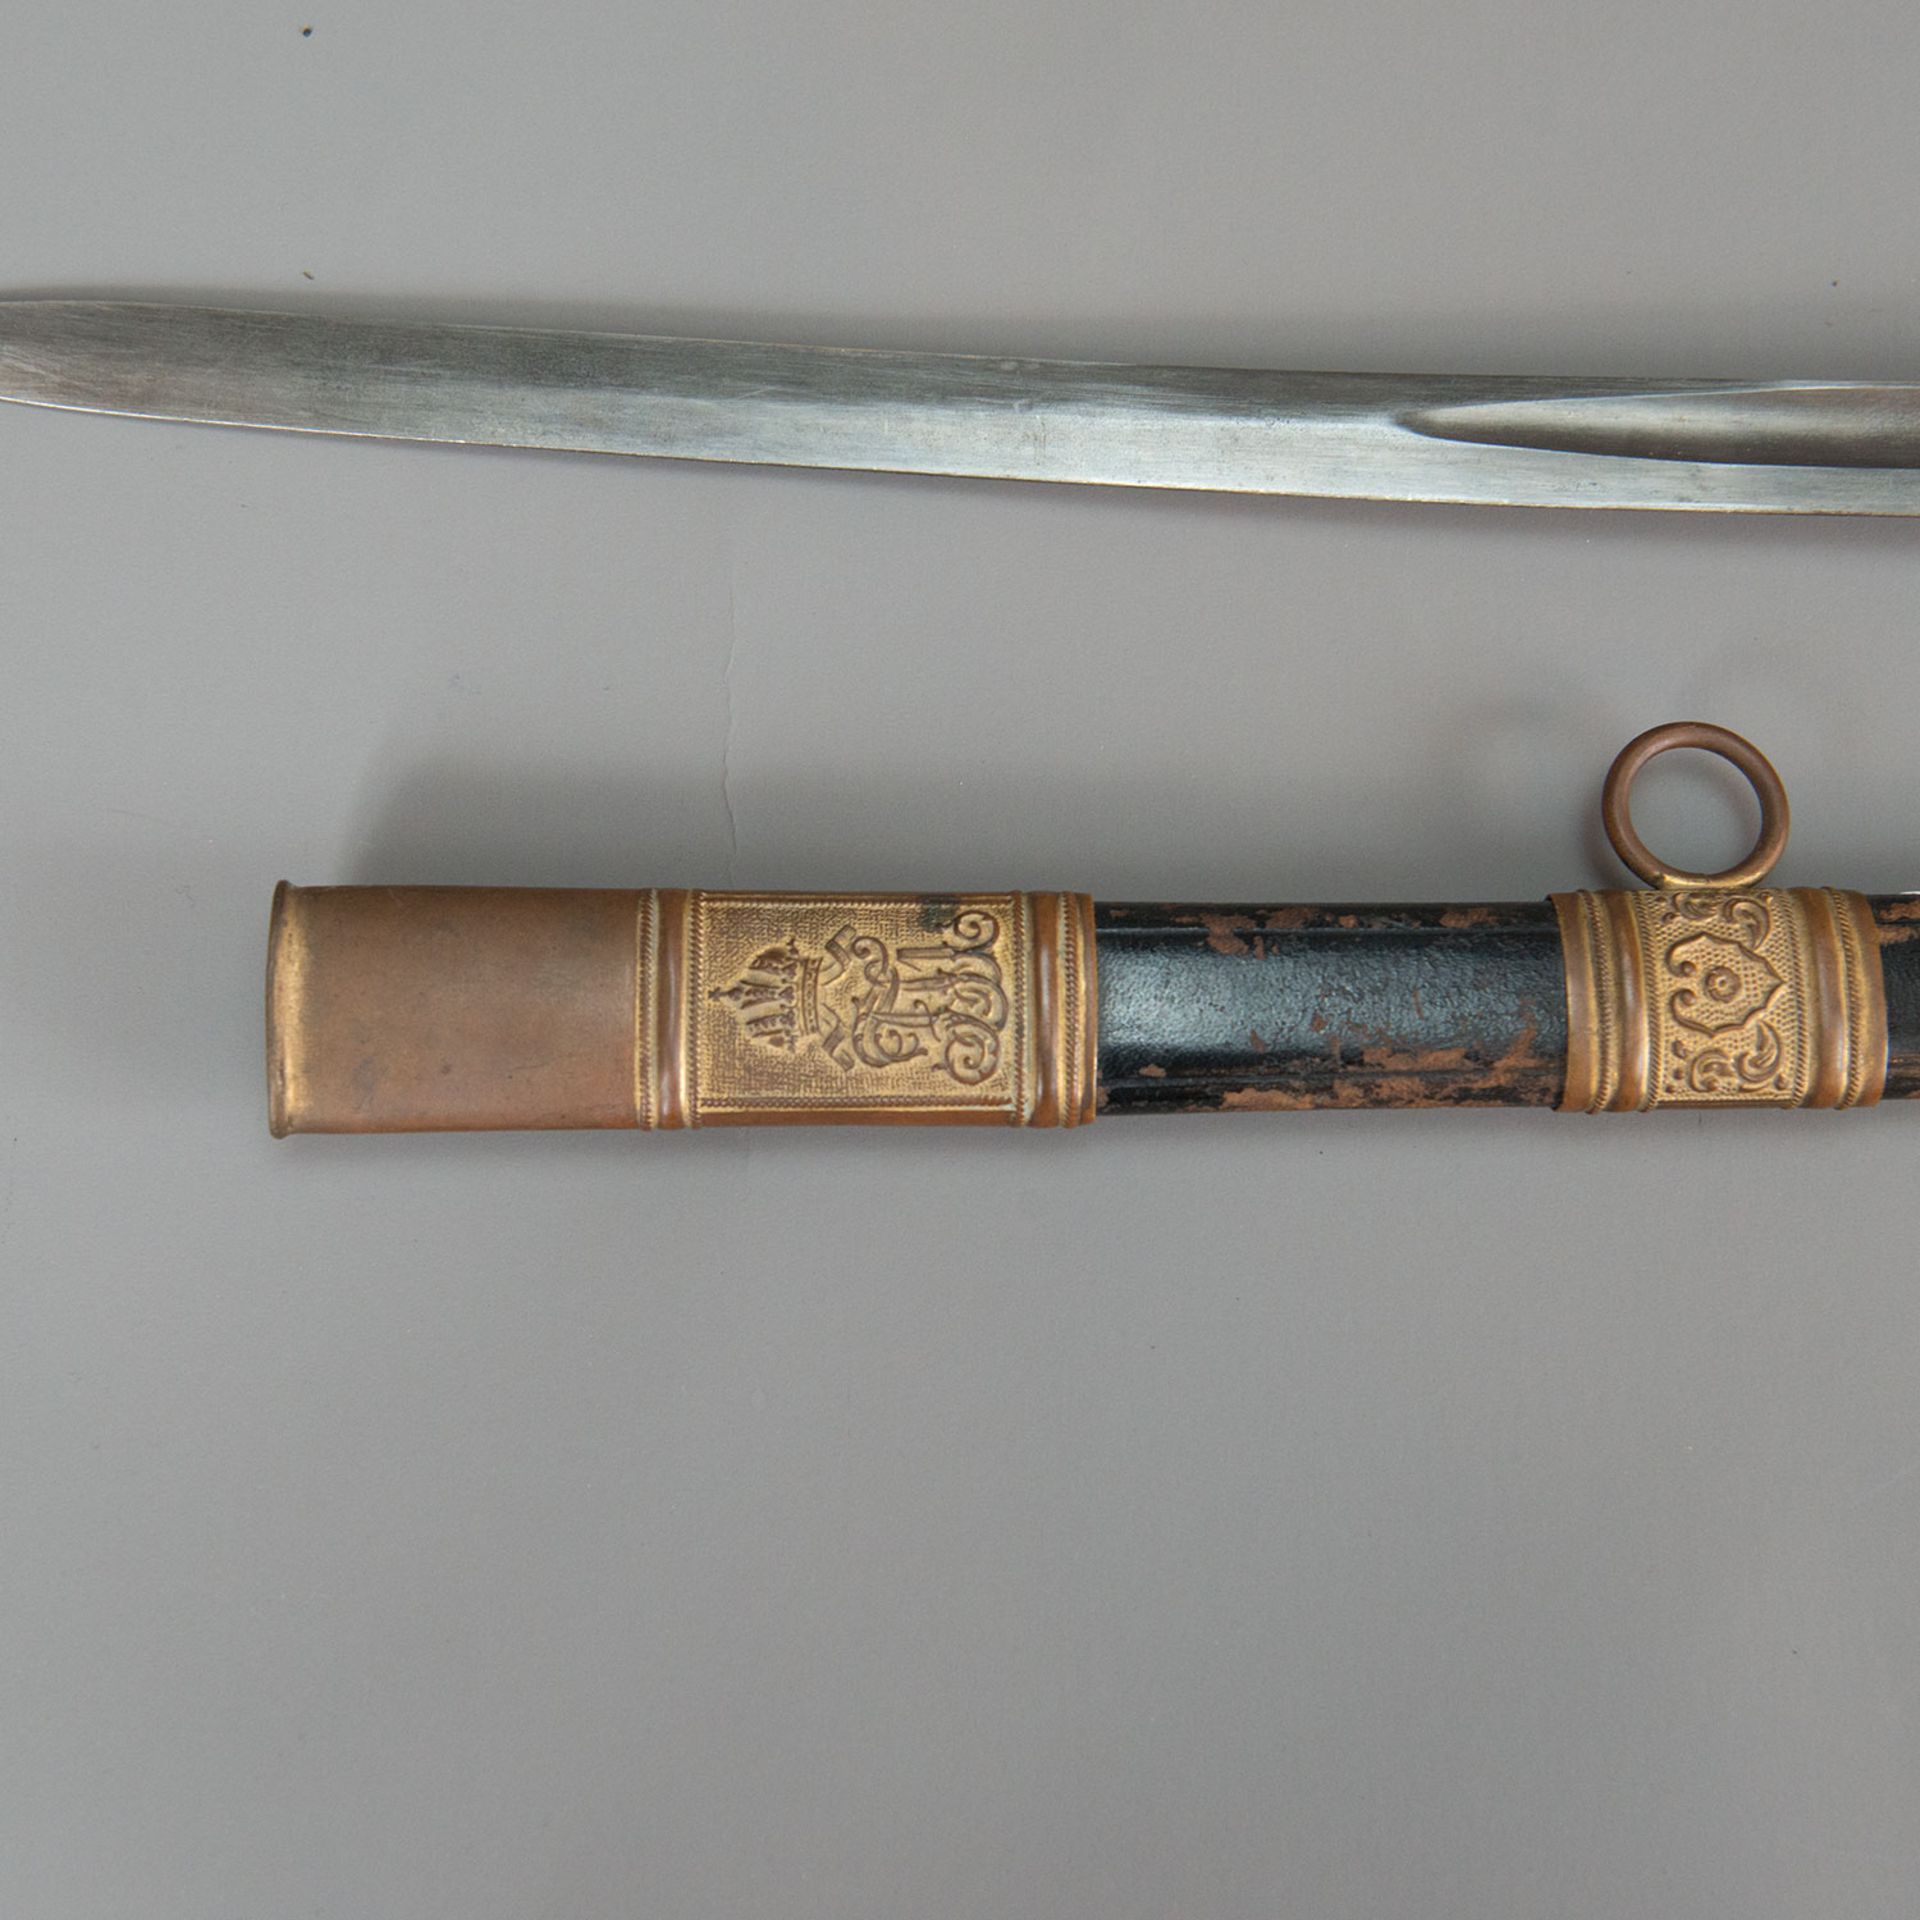 Austro-Hungarian Monarchy Official Saber - Image 3 of 3